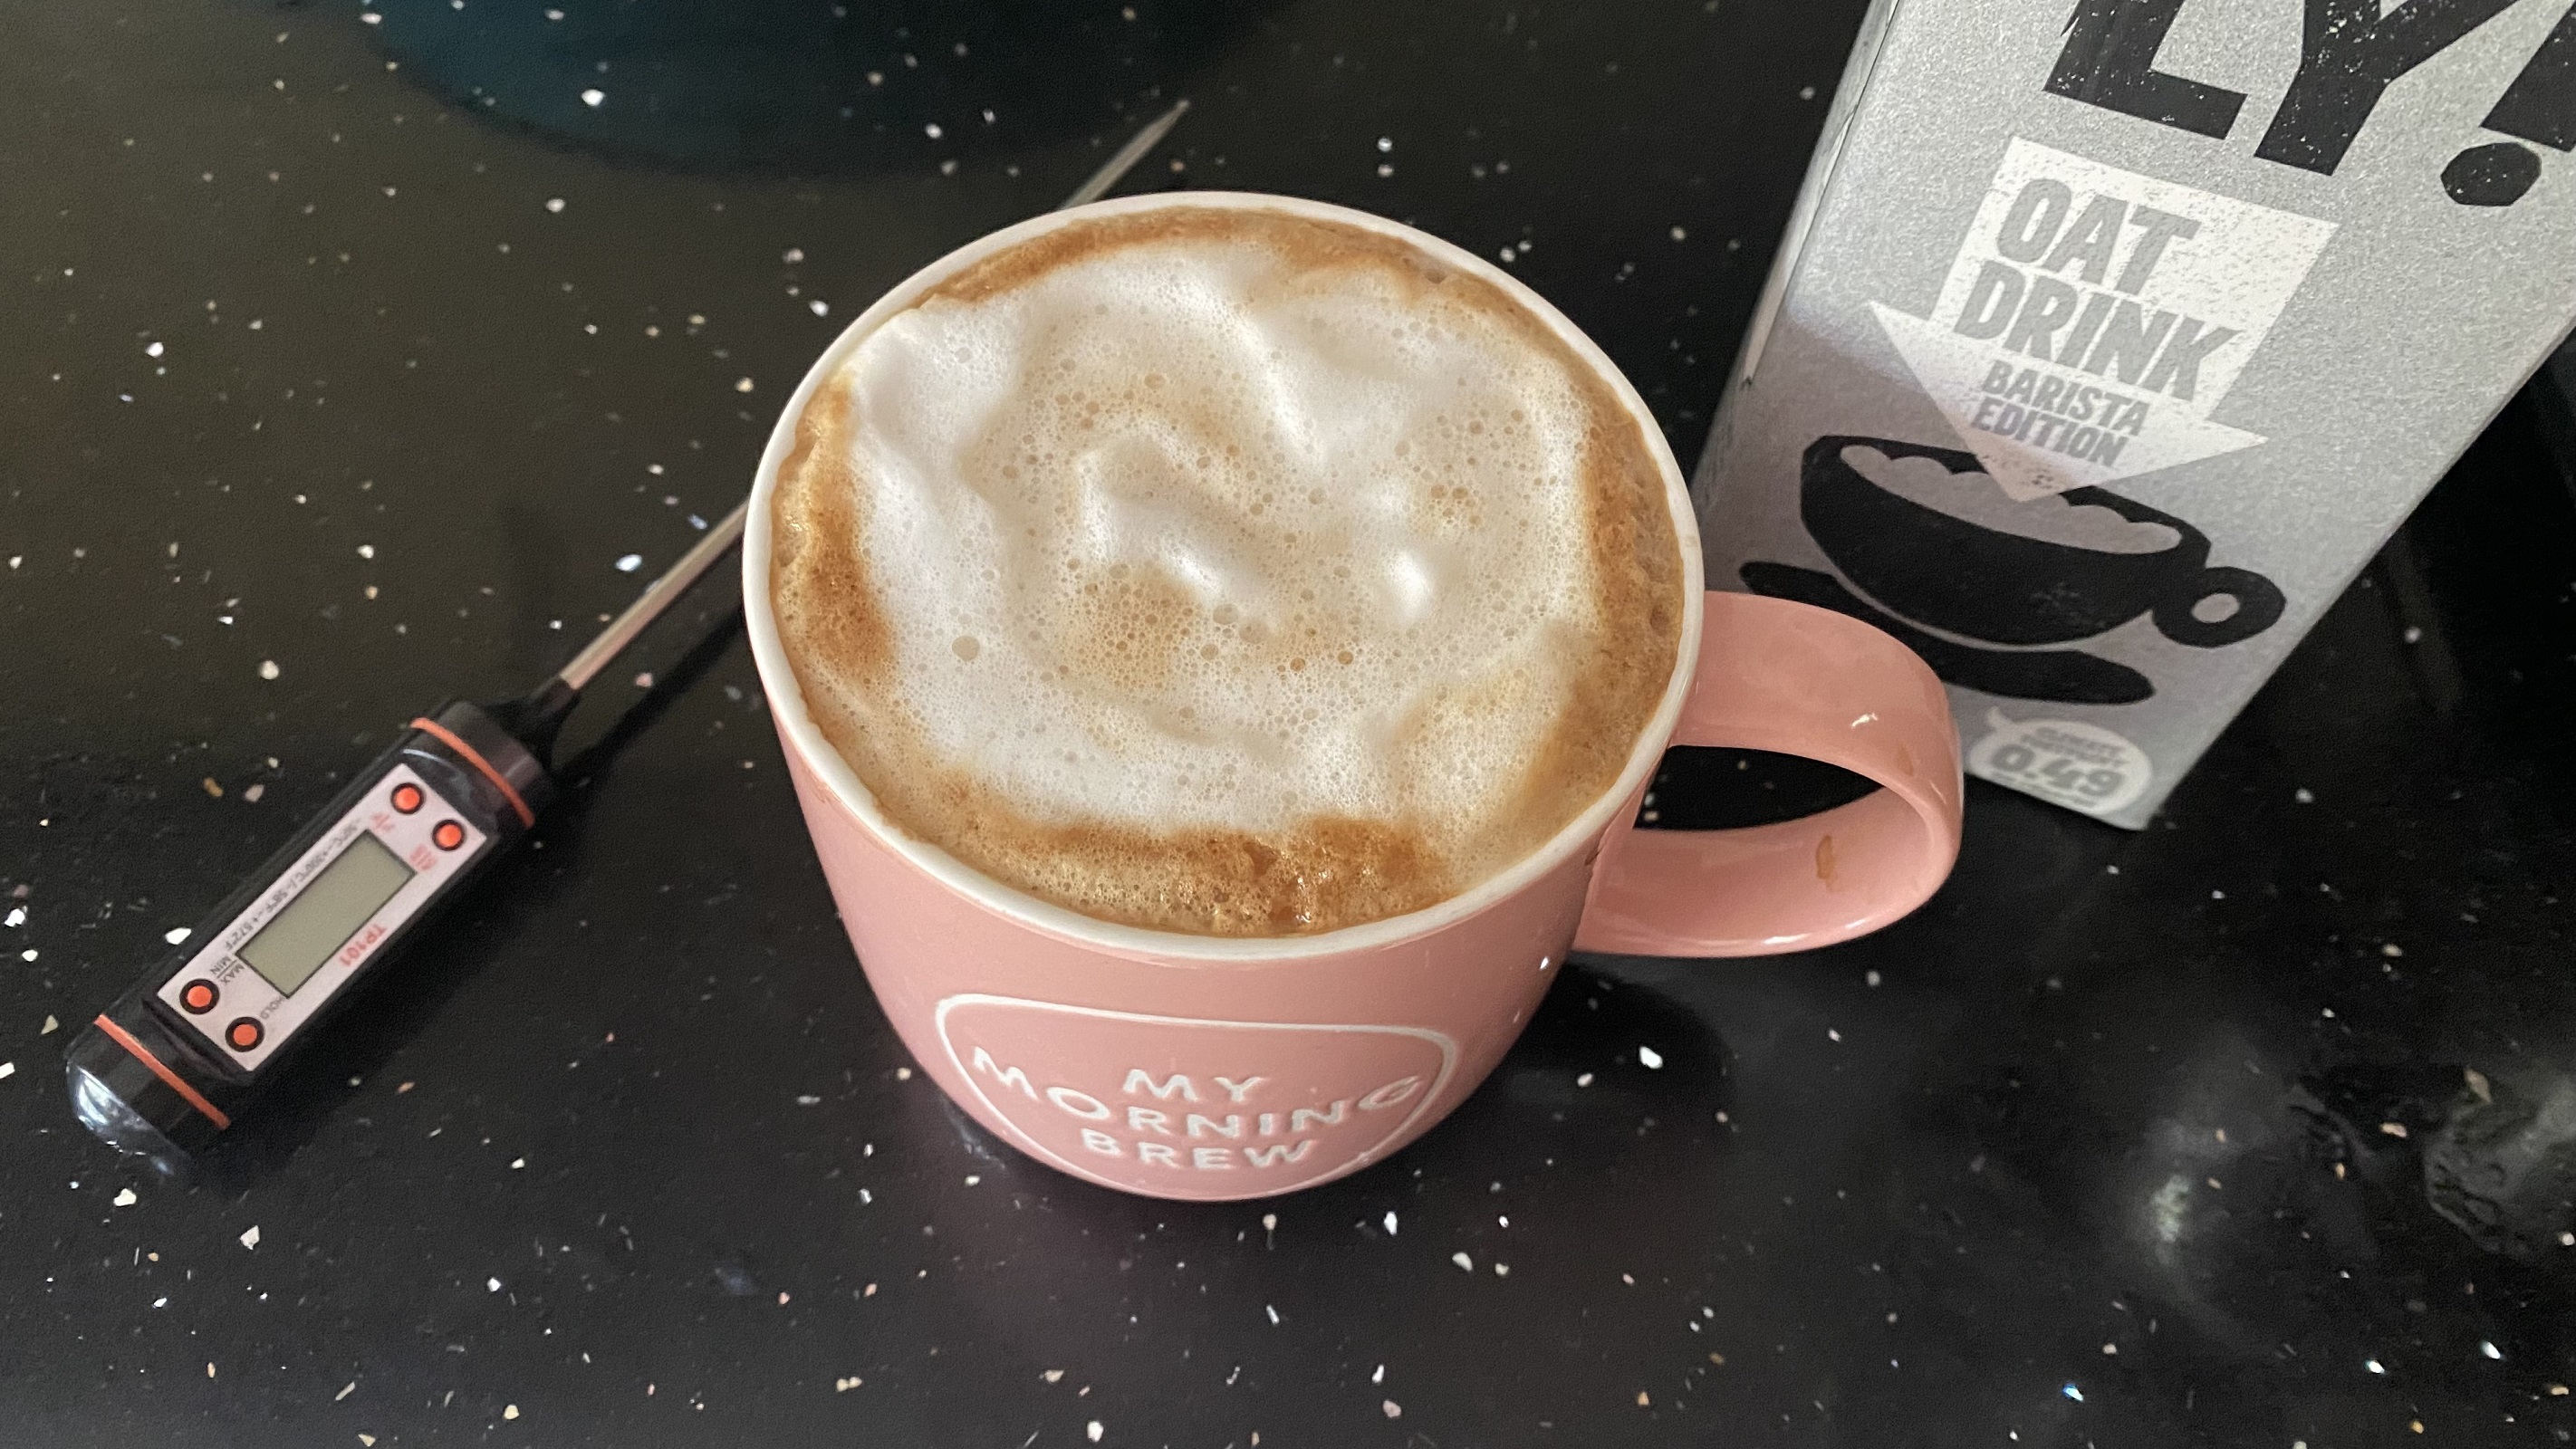 Sage Impress Express creating foam on a cappuccino